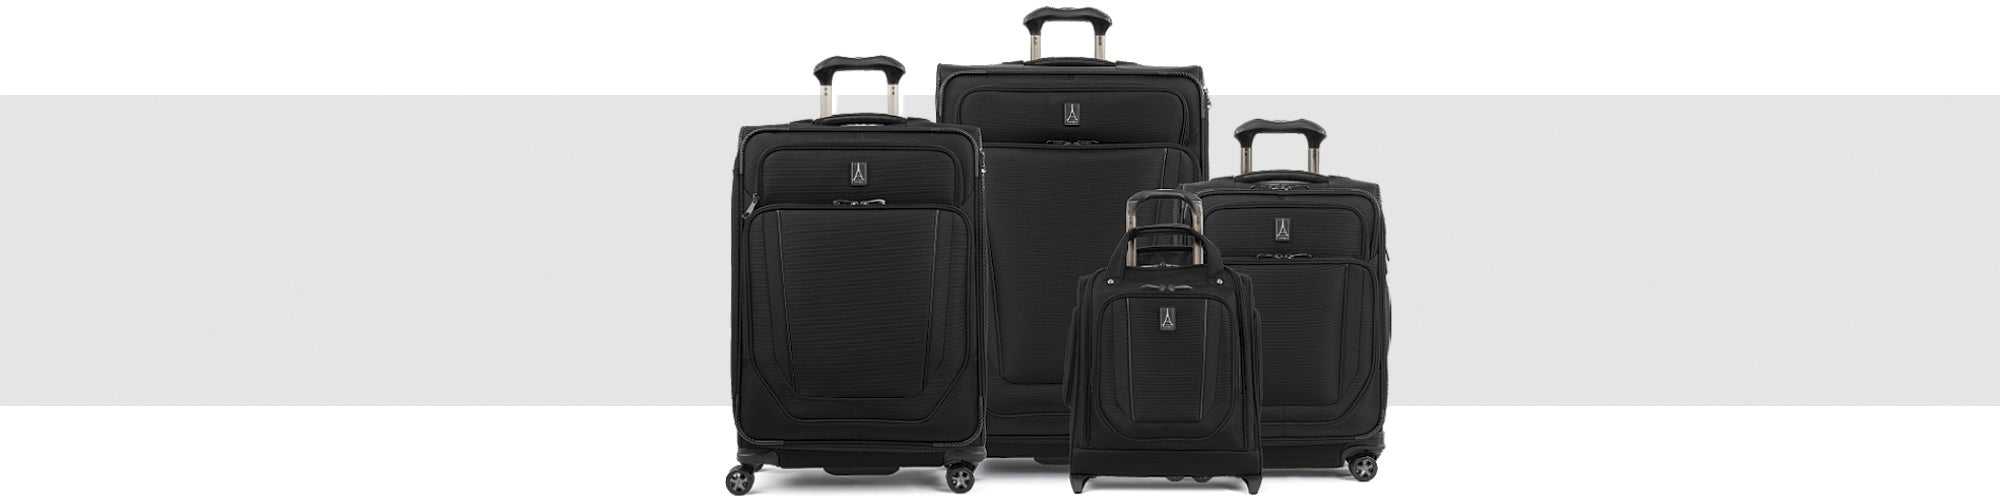 Crew Versapack soft sided luggage including large & medium check-ins, carry-on spinner, & underseat baggage.